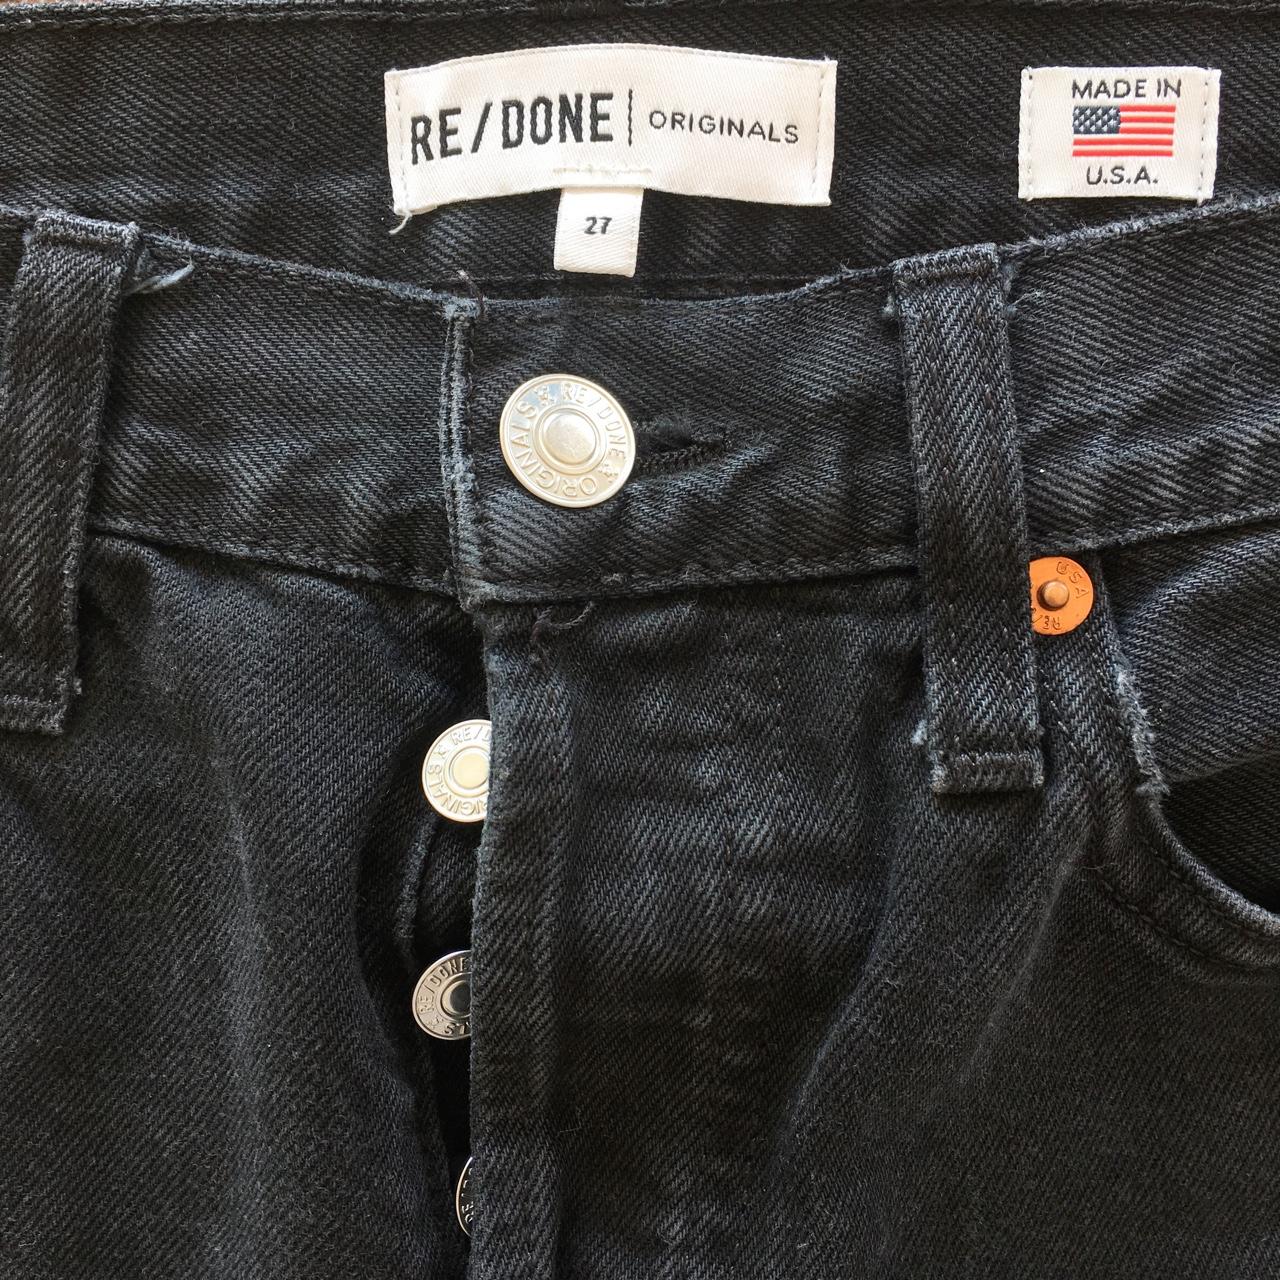 RE/DONE Women's Jeans (4)